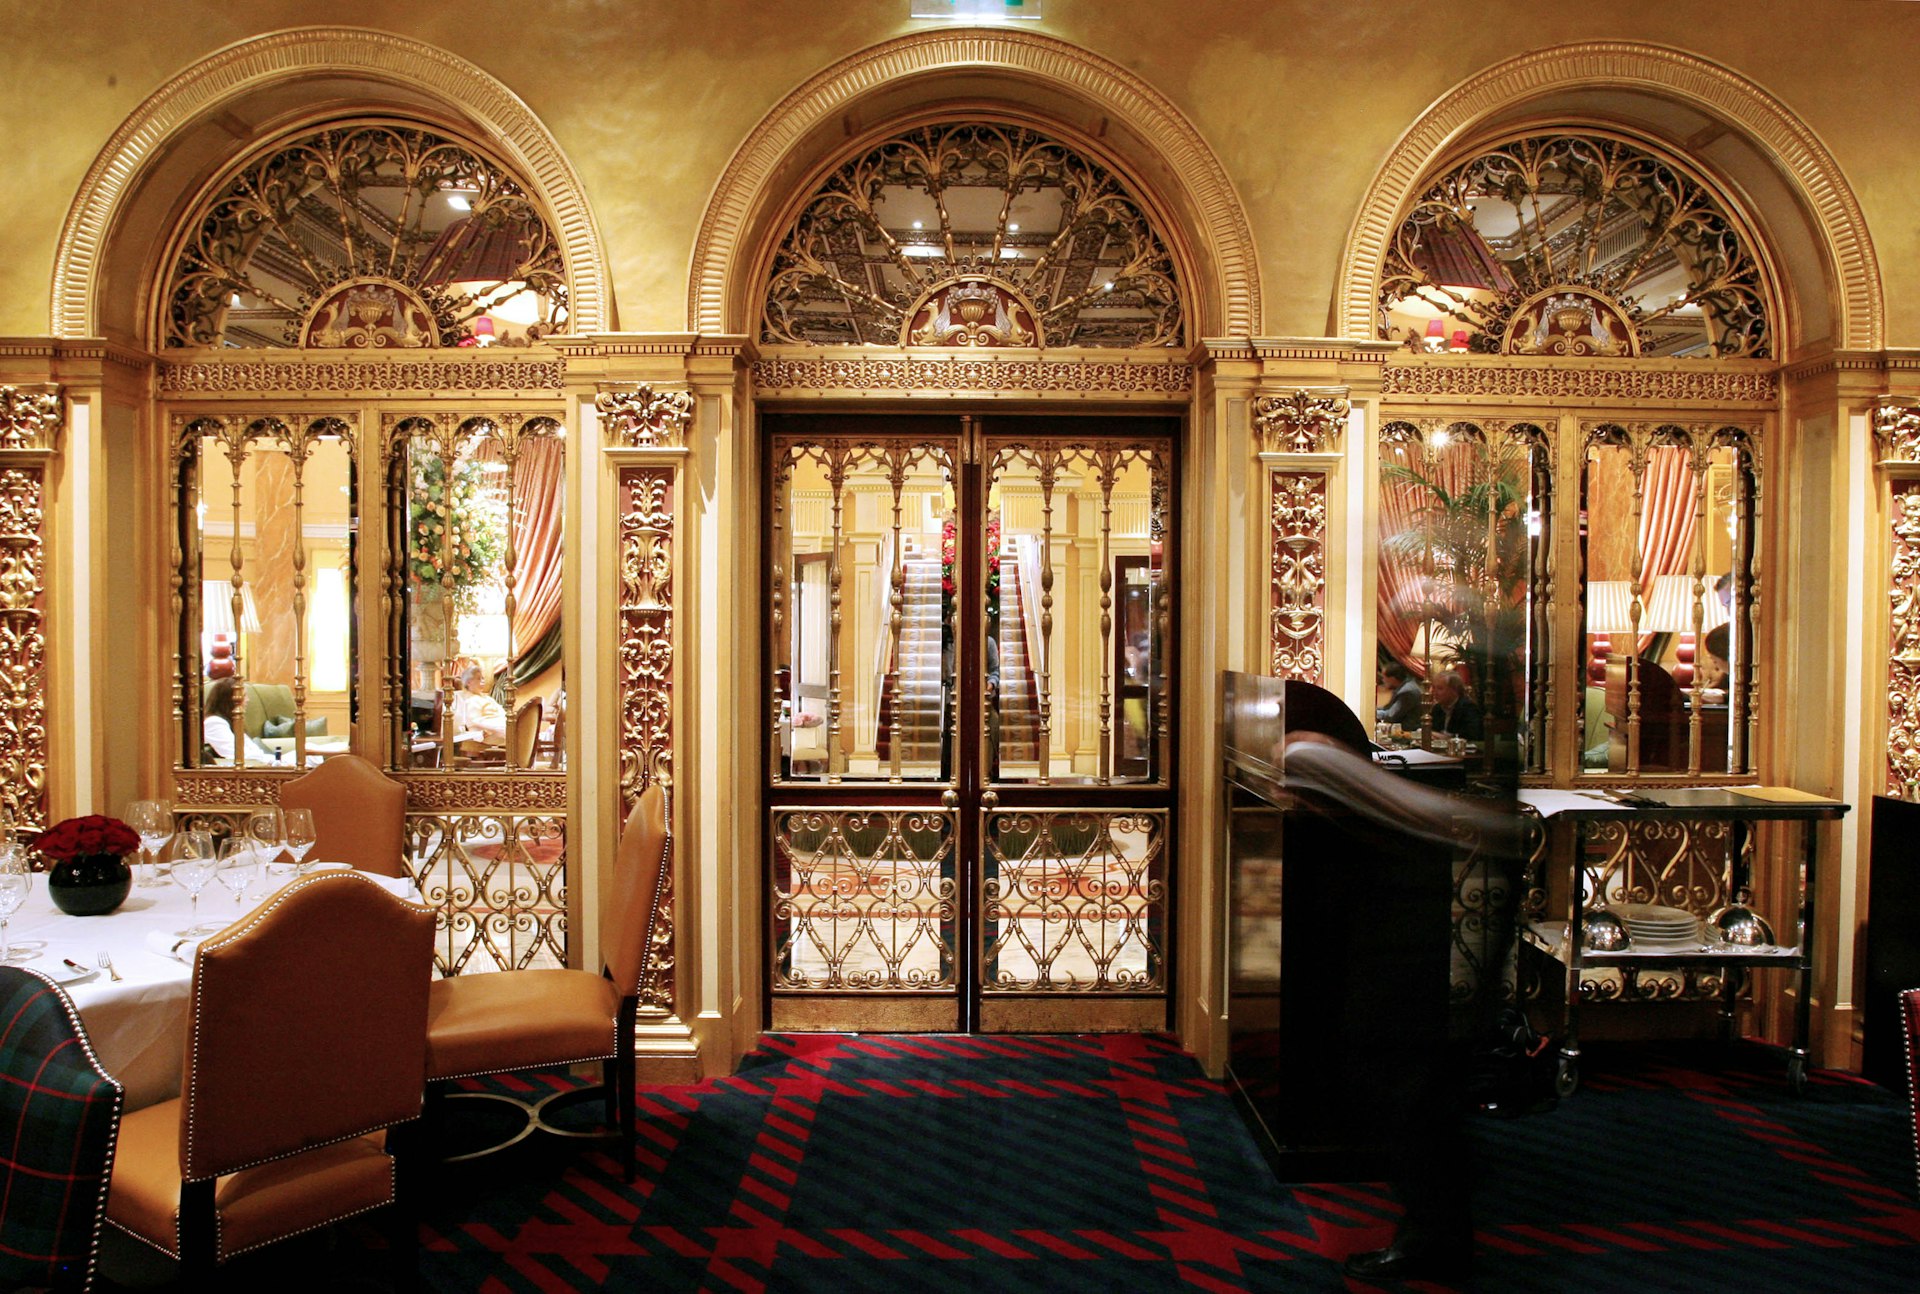 Three ornate gold and trellis doors, entrances to the Dorchester Grill in London